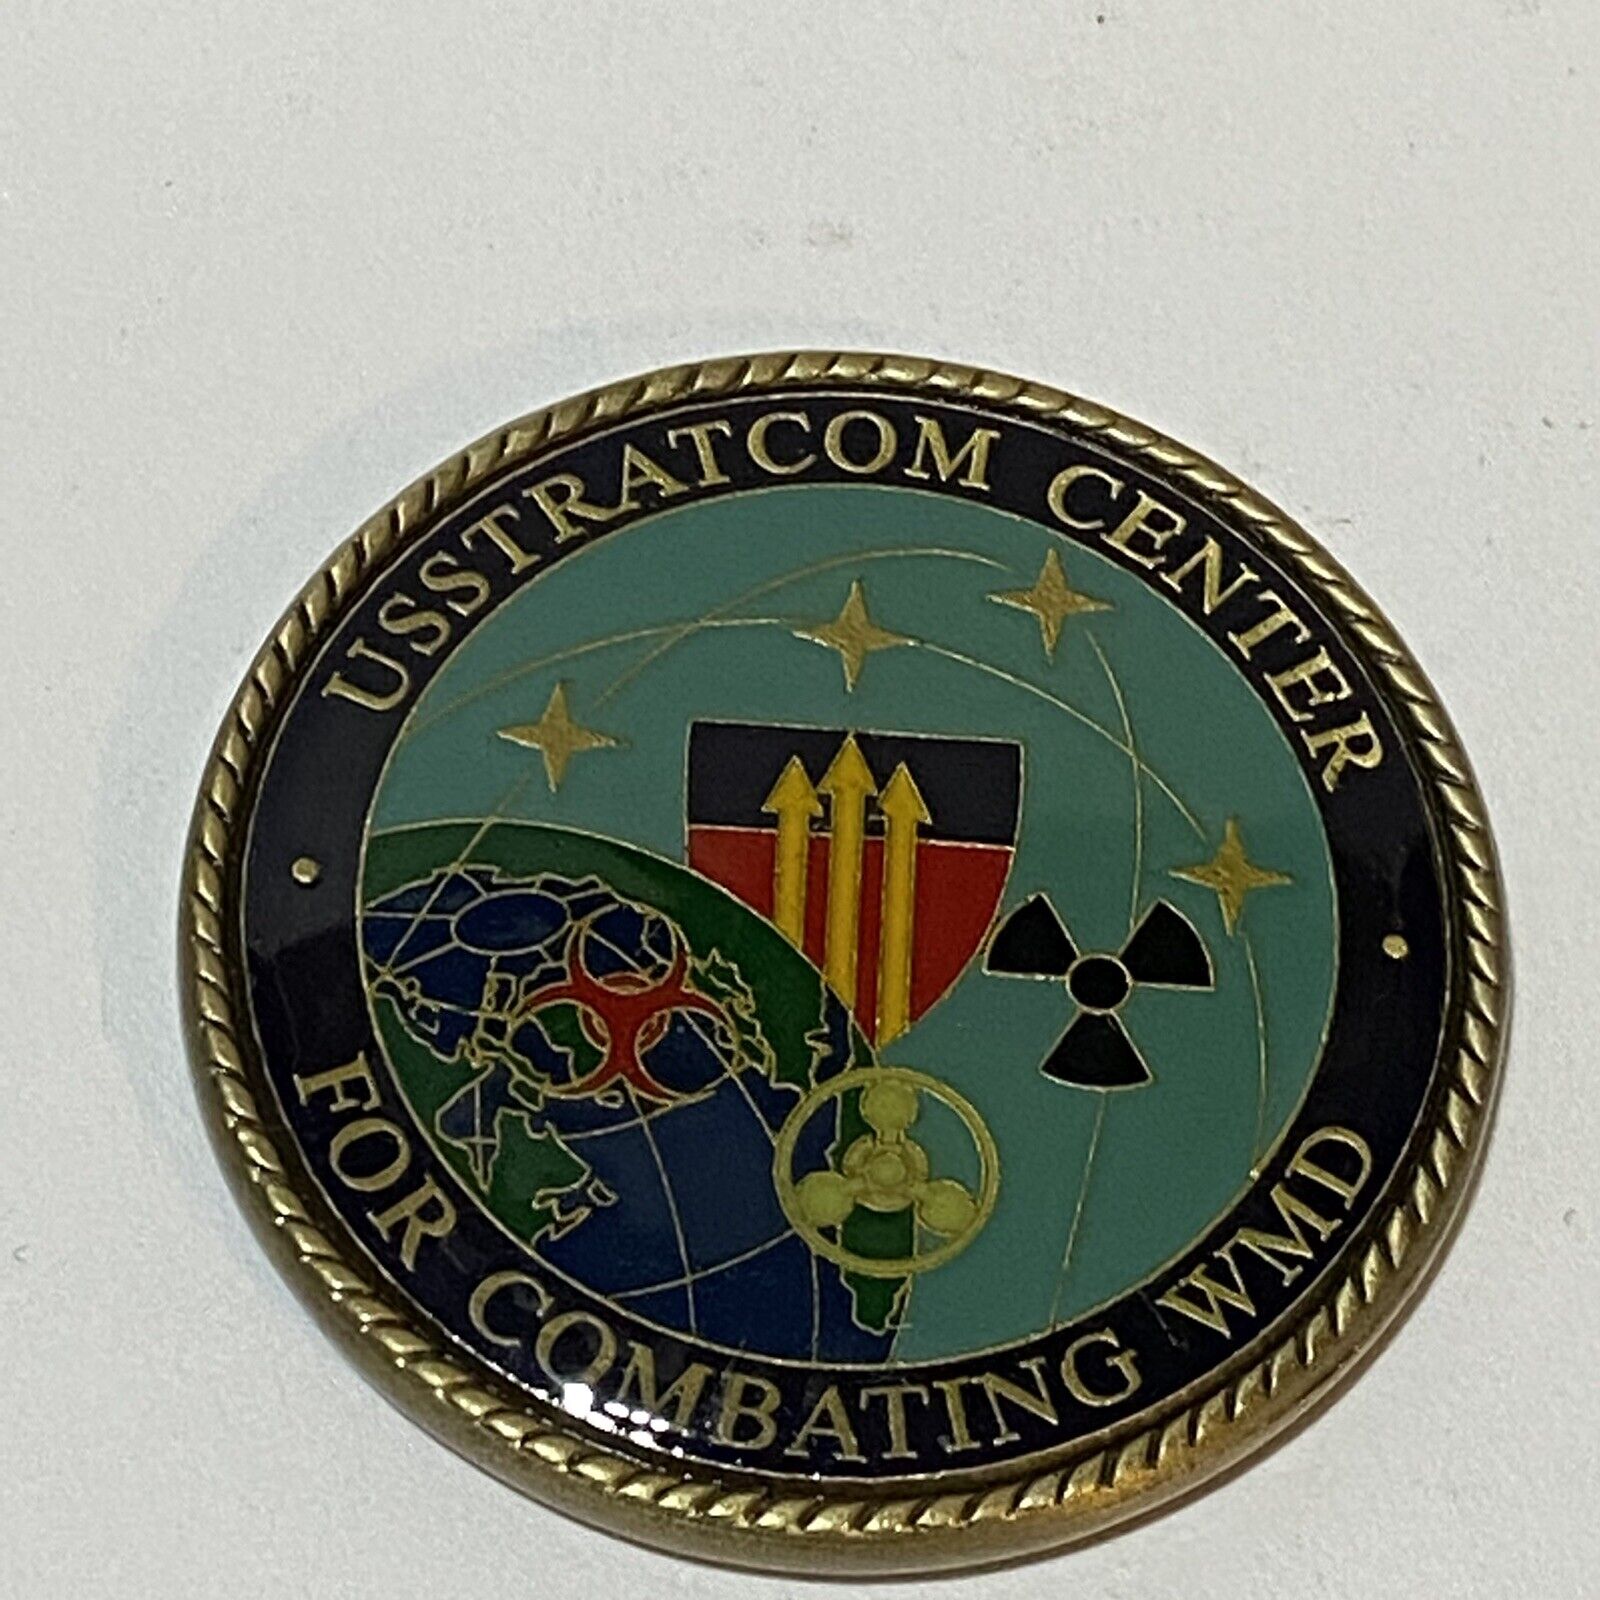 USSTRATCOM Center for Combating Weapons of Mass Destruction - WMD Challenge Coin